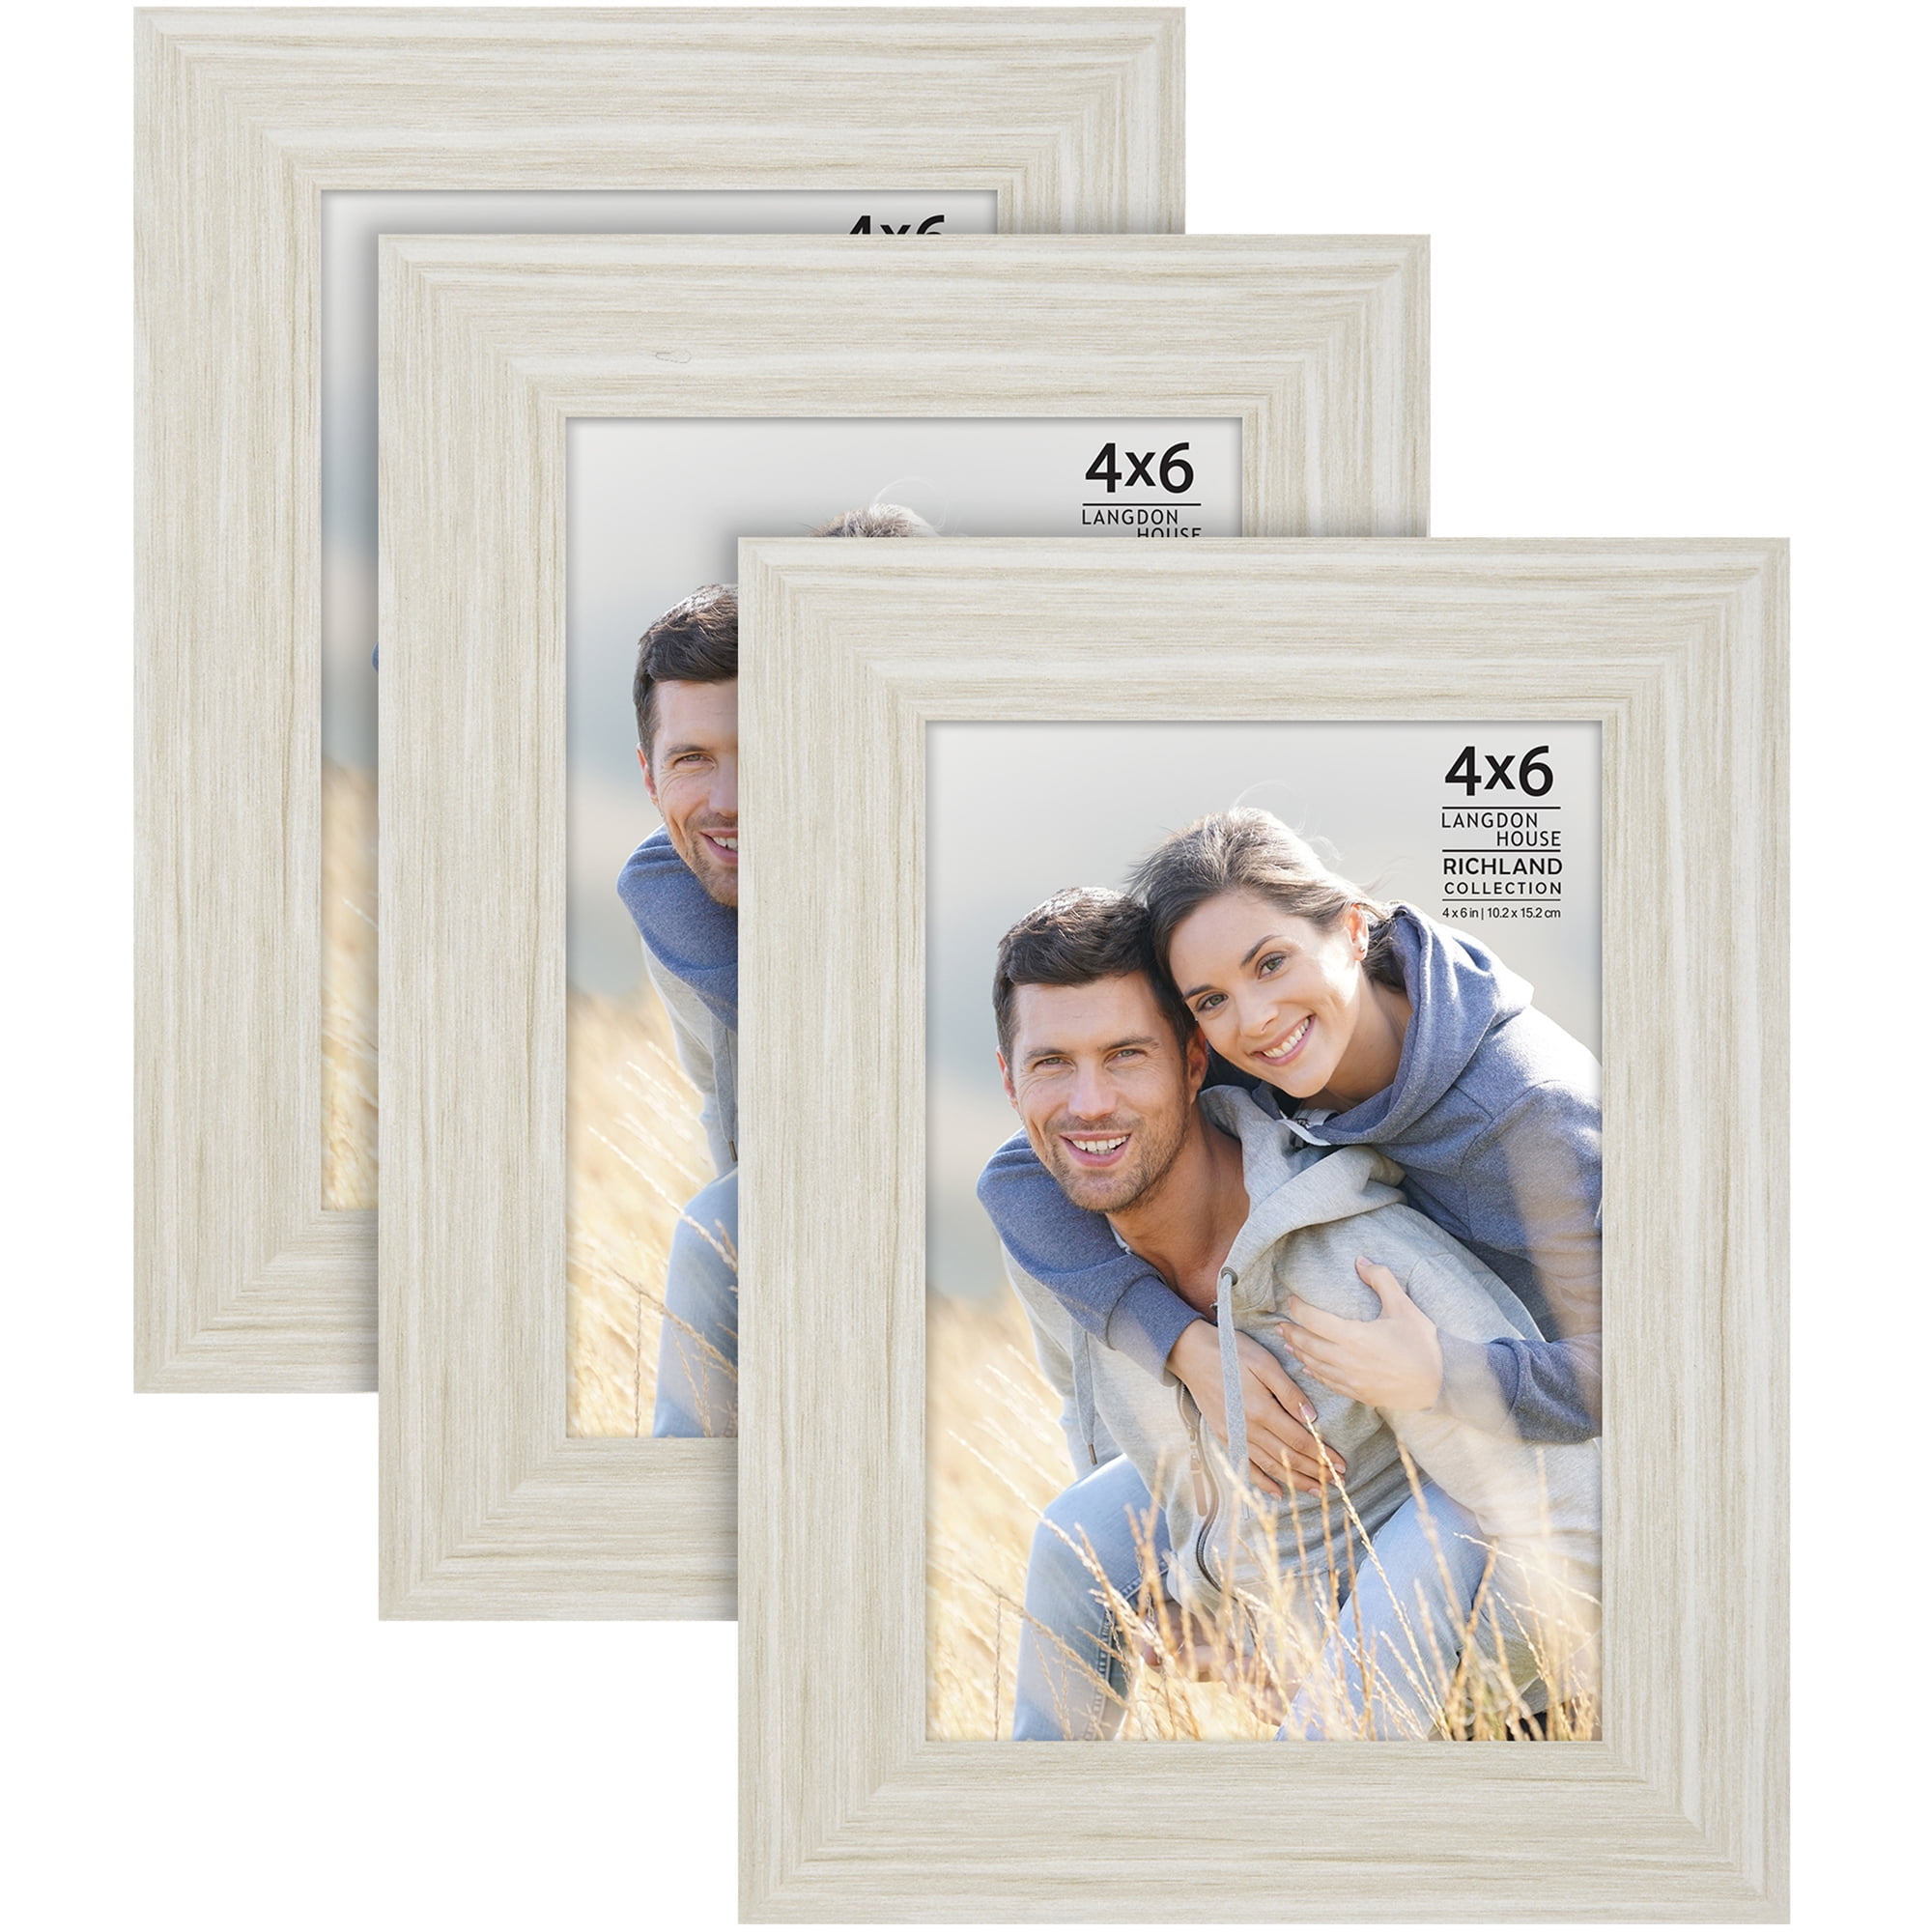 STUDIO 500 VALUE 2-PACK~11x17-inch Smooth White Wide Contemporary Picture Frames 